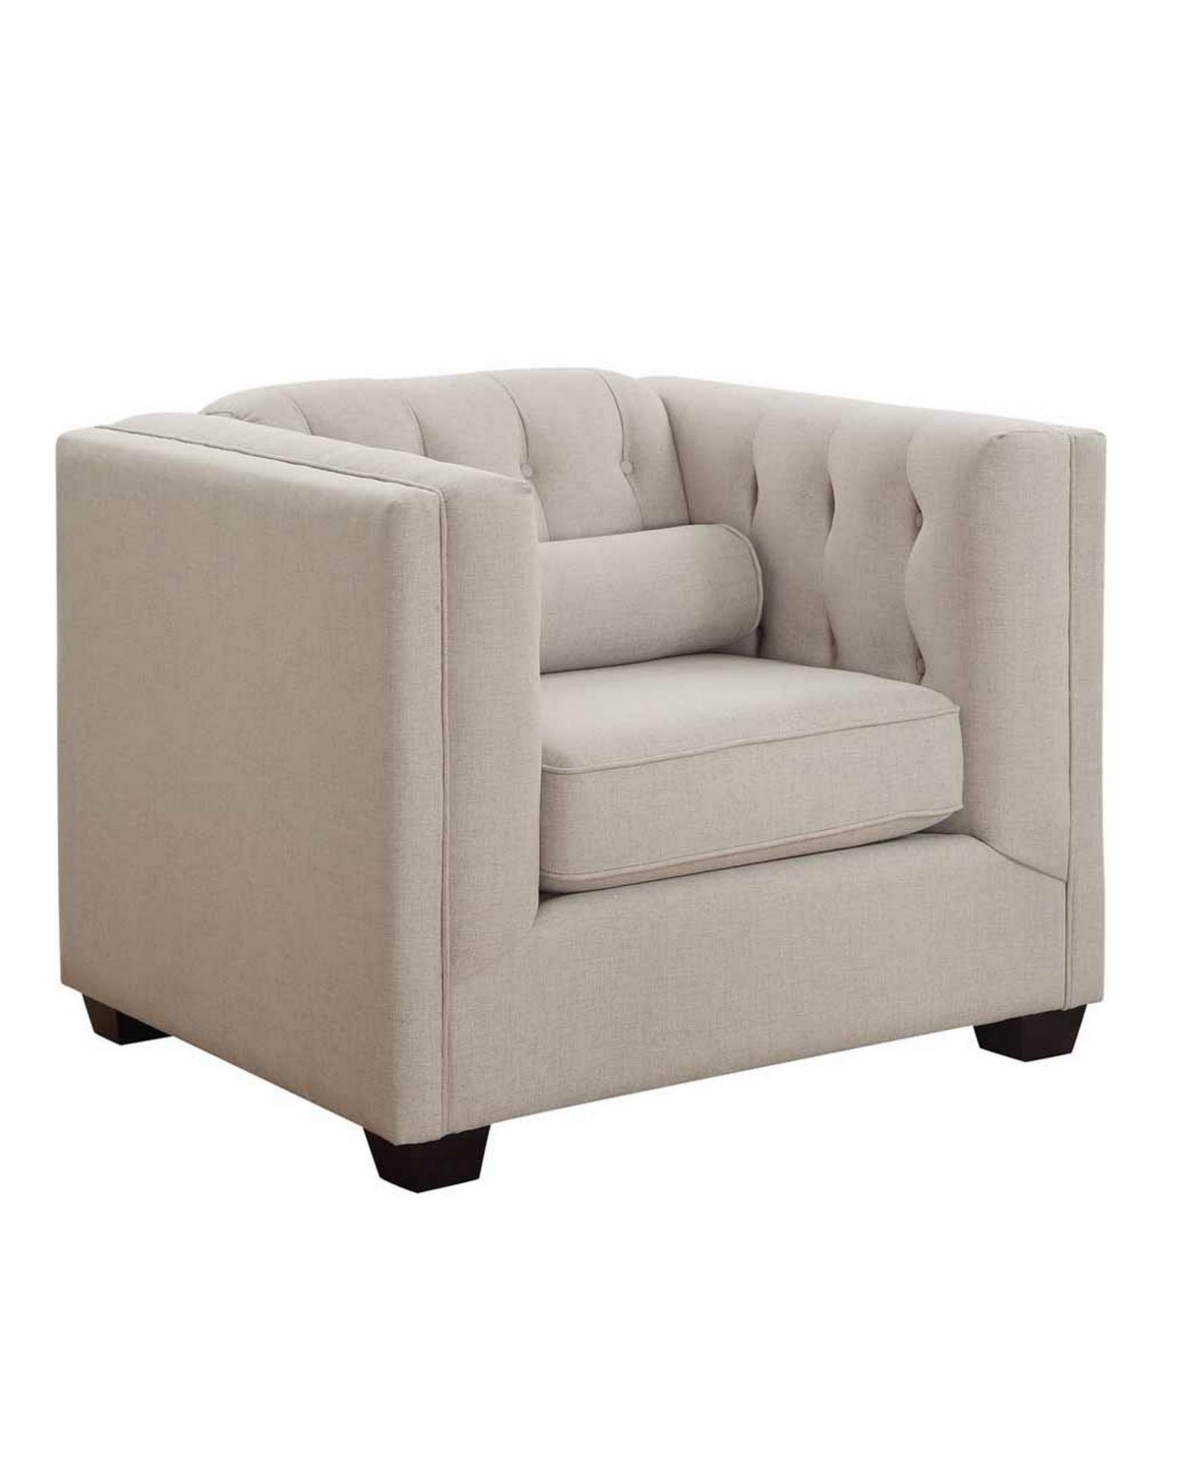 Coaster Home Furnishings Cairns Upholstered Chair